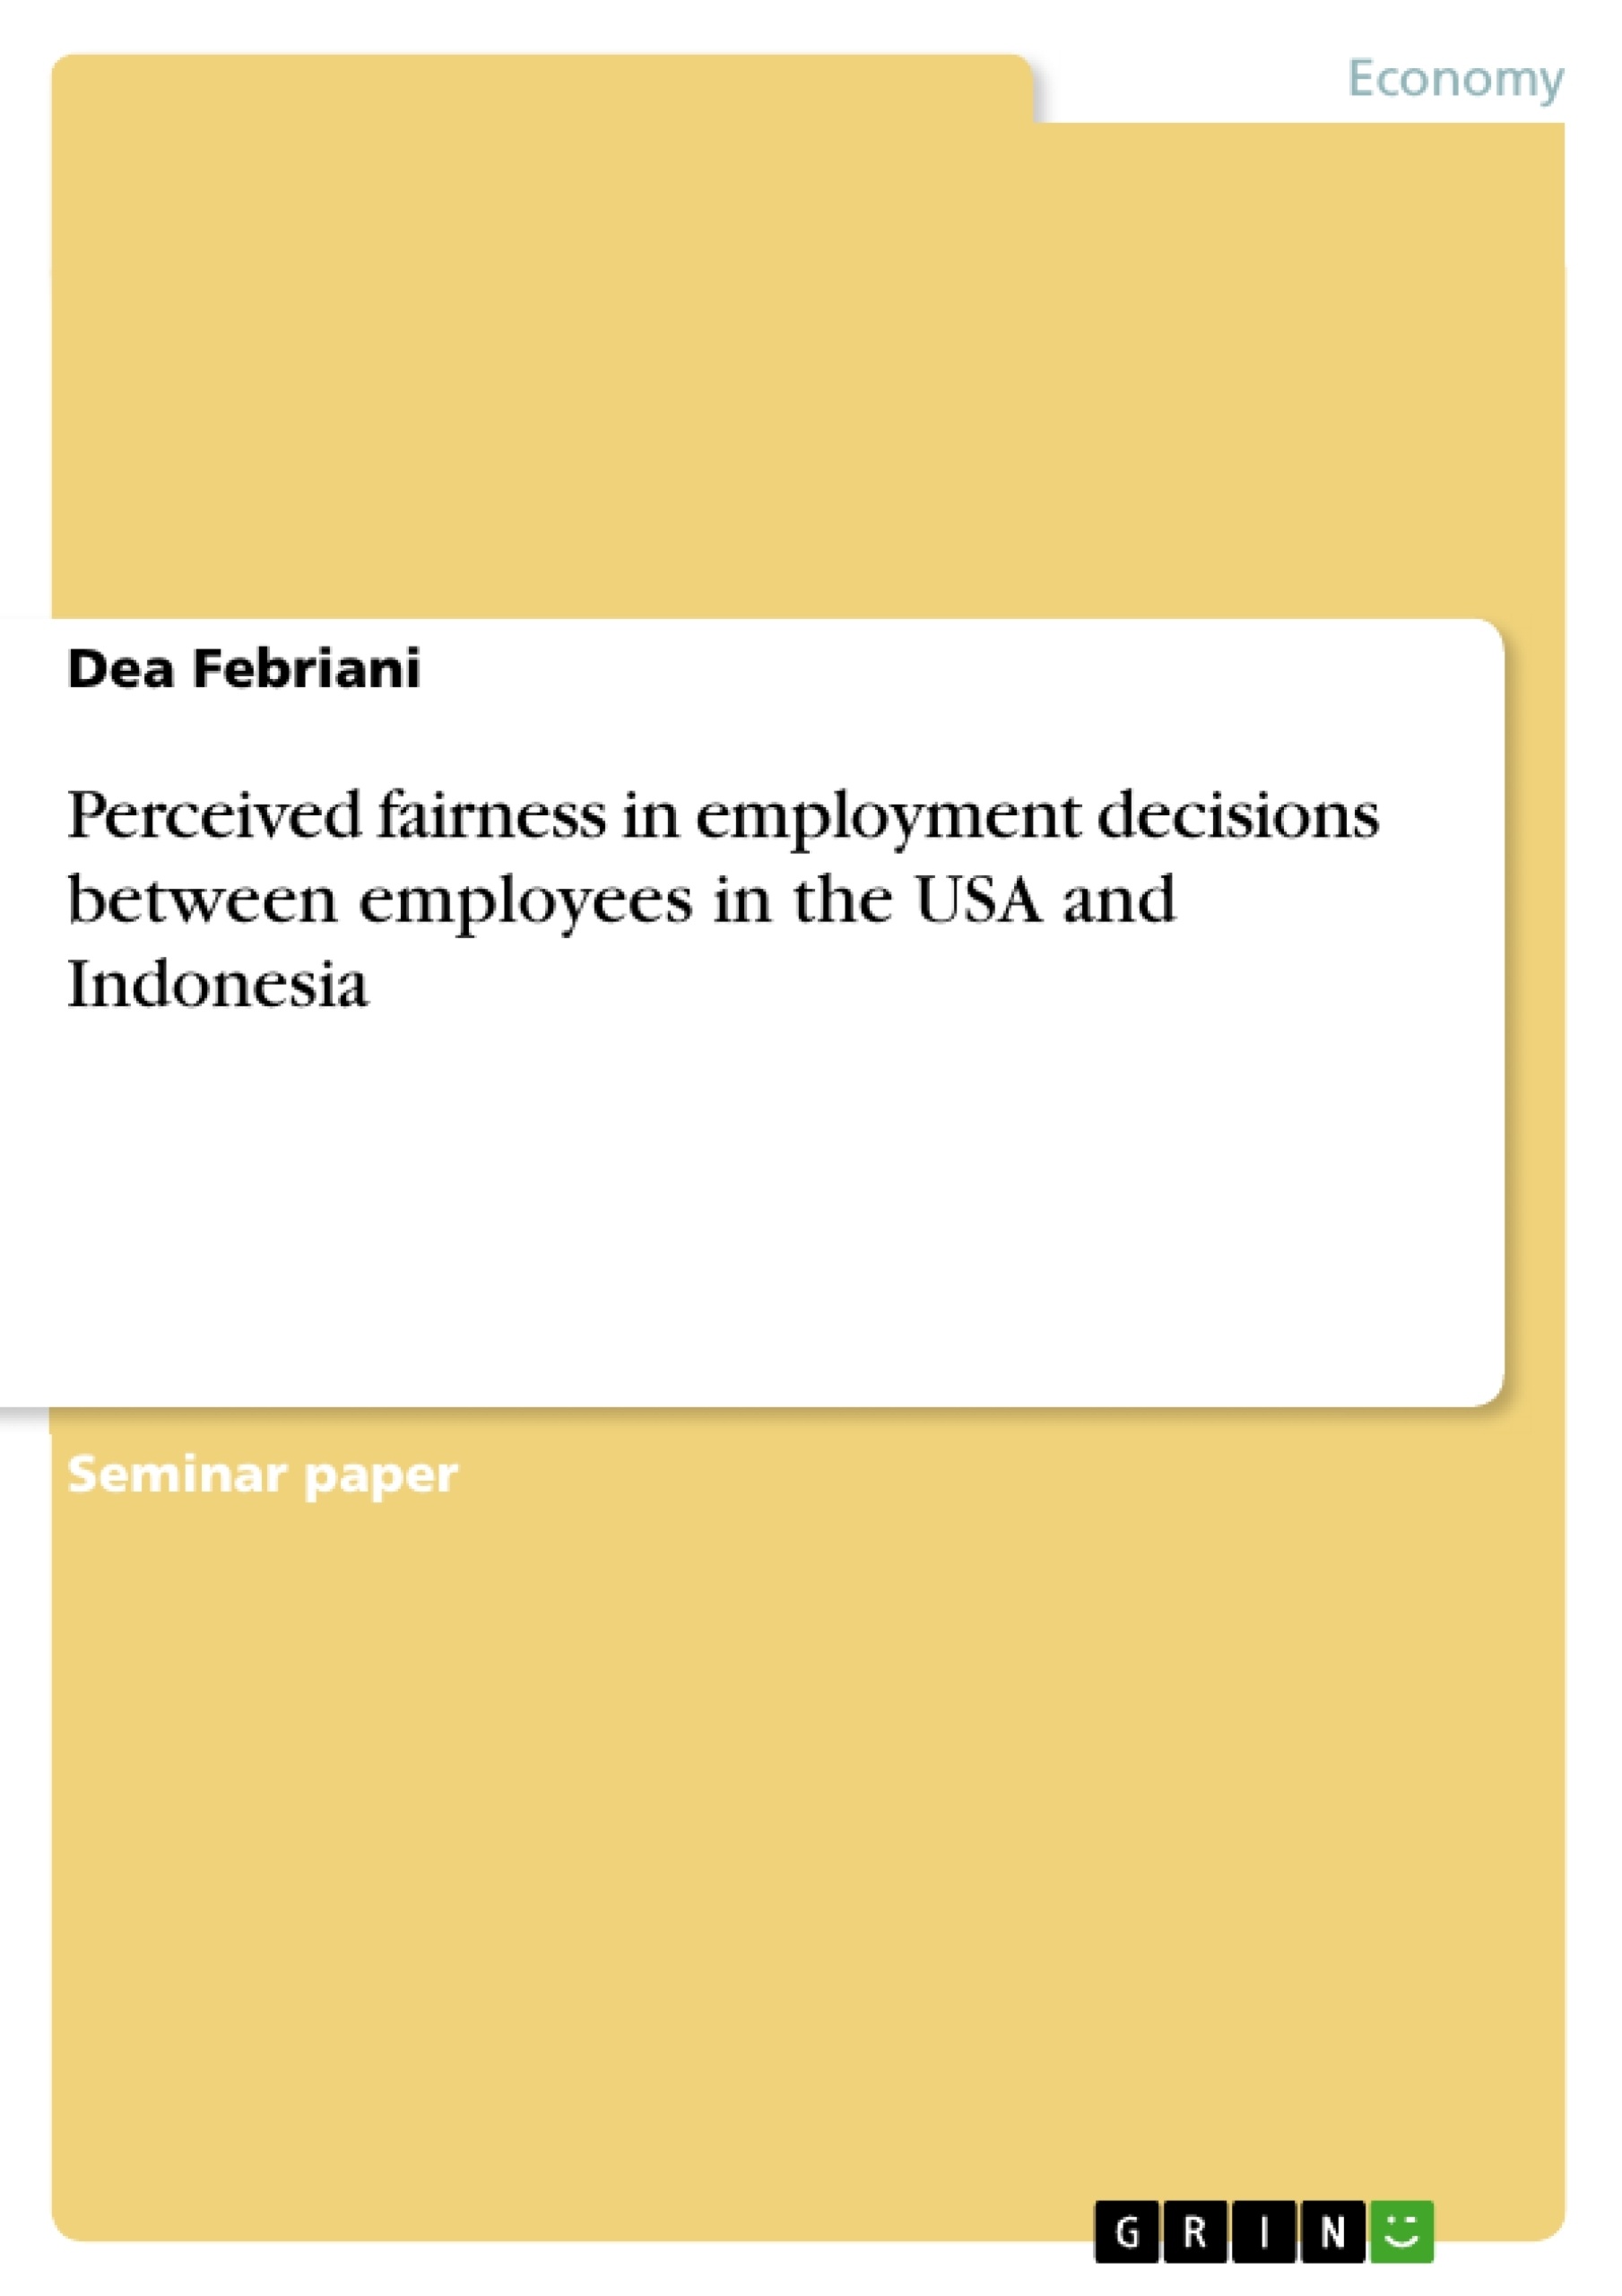 Titre: Perceived fairness in employment decisions between employees in the USA and Indonesia